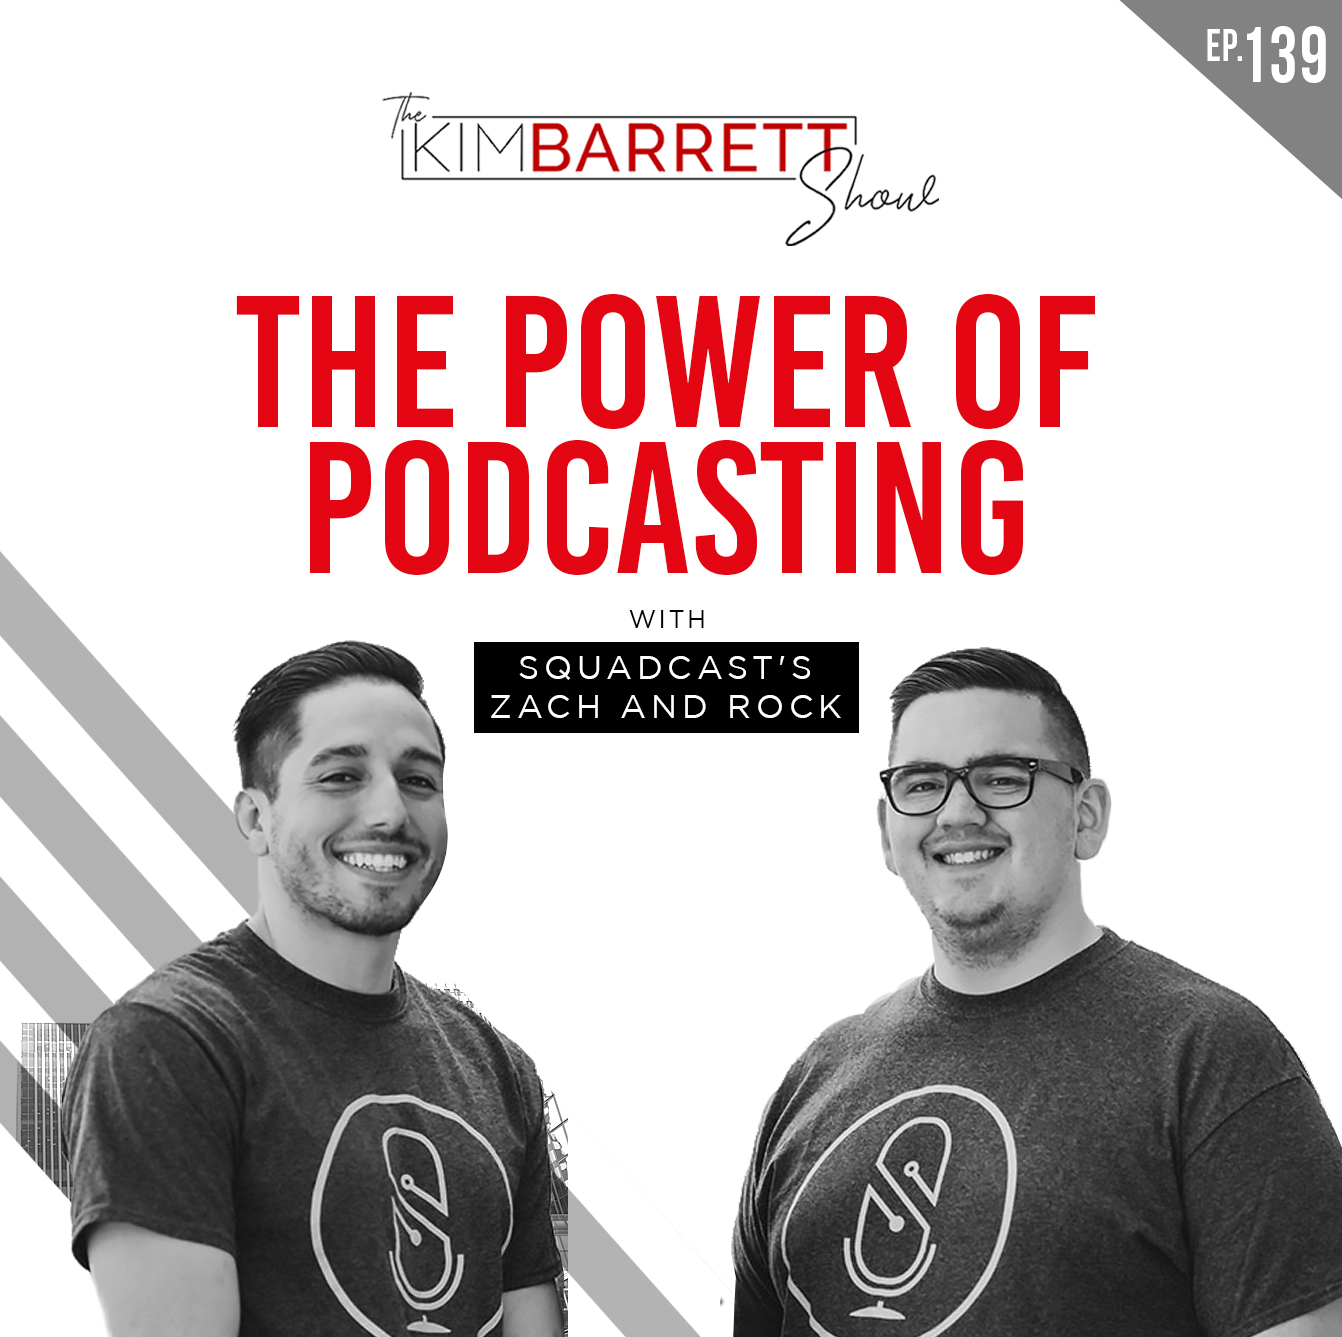 [Throwback Episode] The Power of Podcasting with SquadCast's Zach and Rock